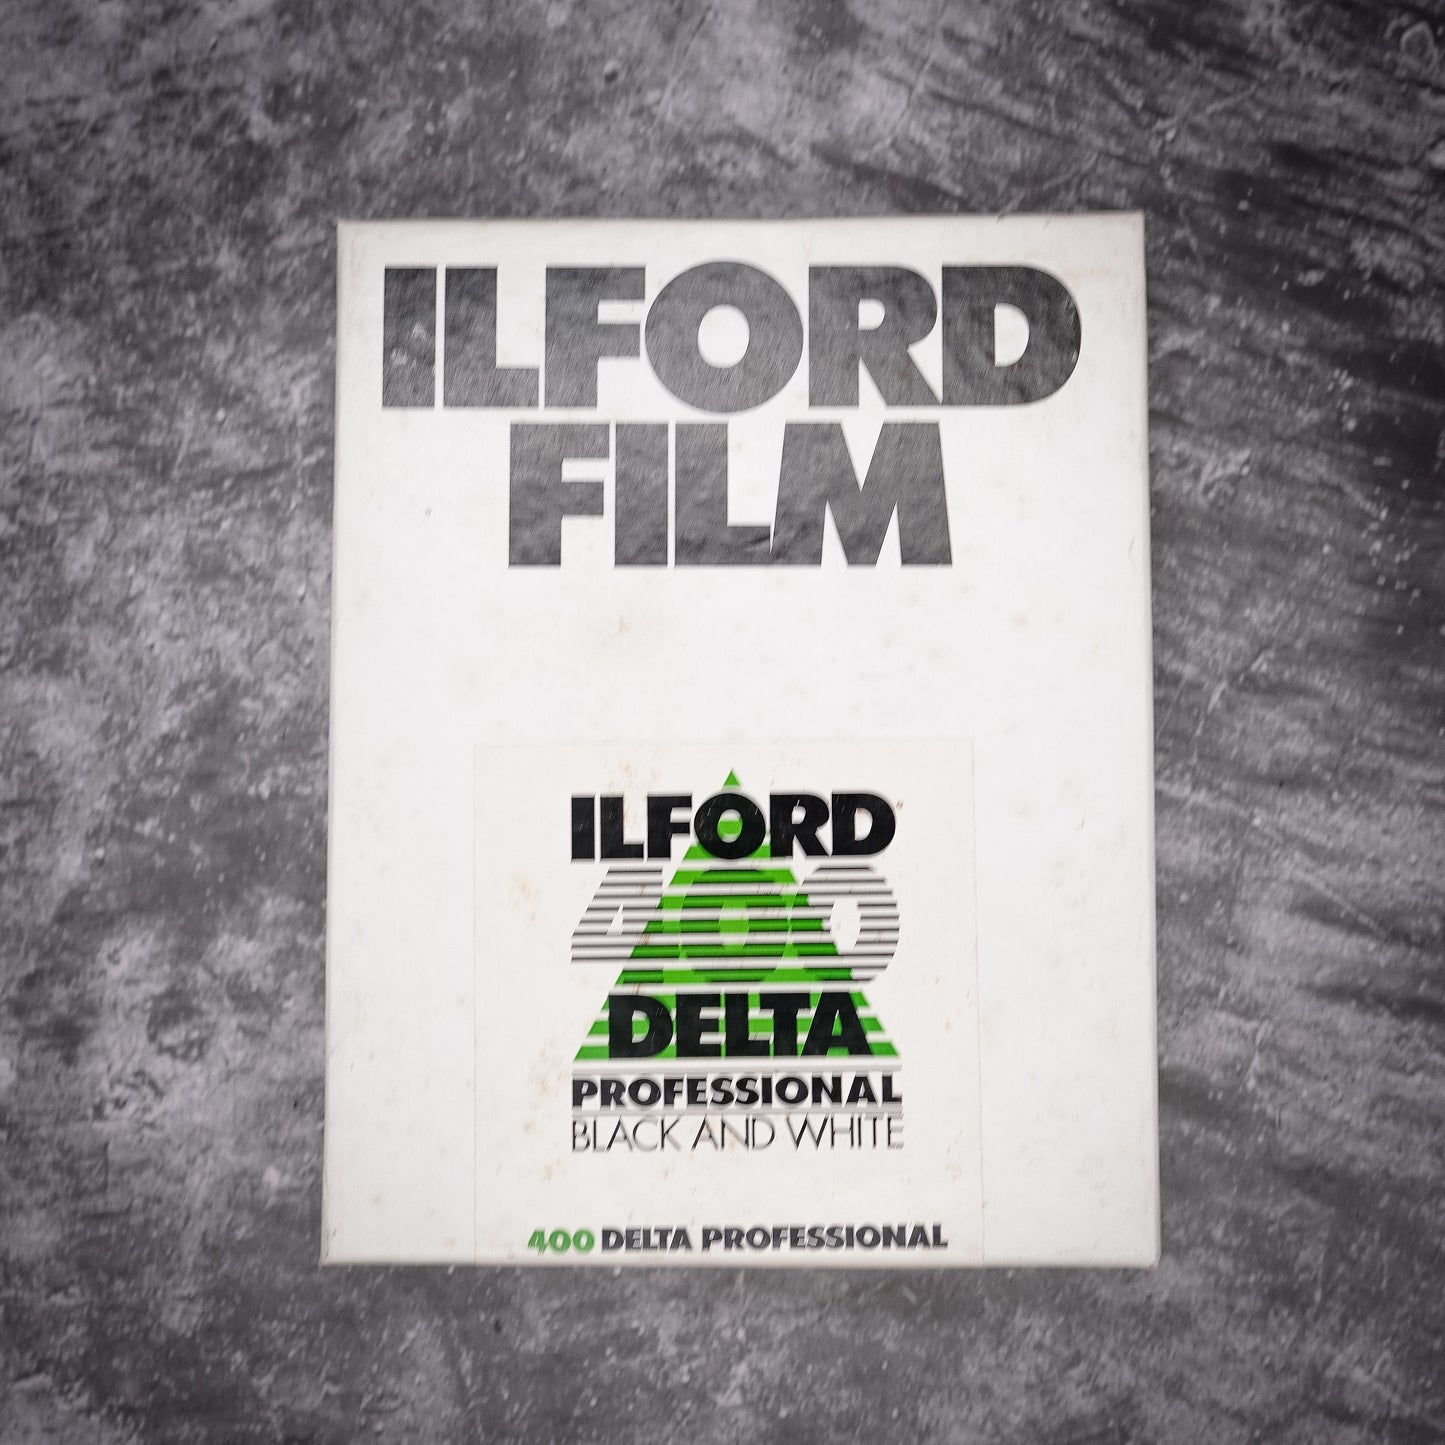 Expired 4x5 Large Format Film | Ilford Delta 400 Exp. 1998 | Sealed In Original Box